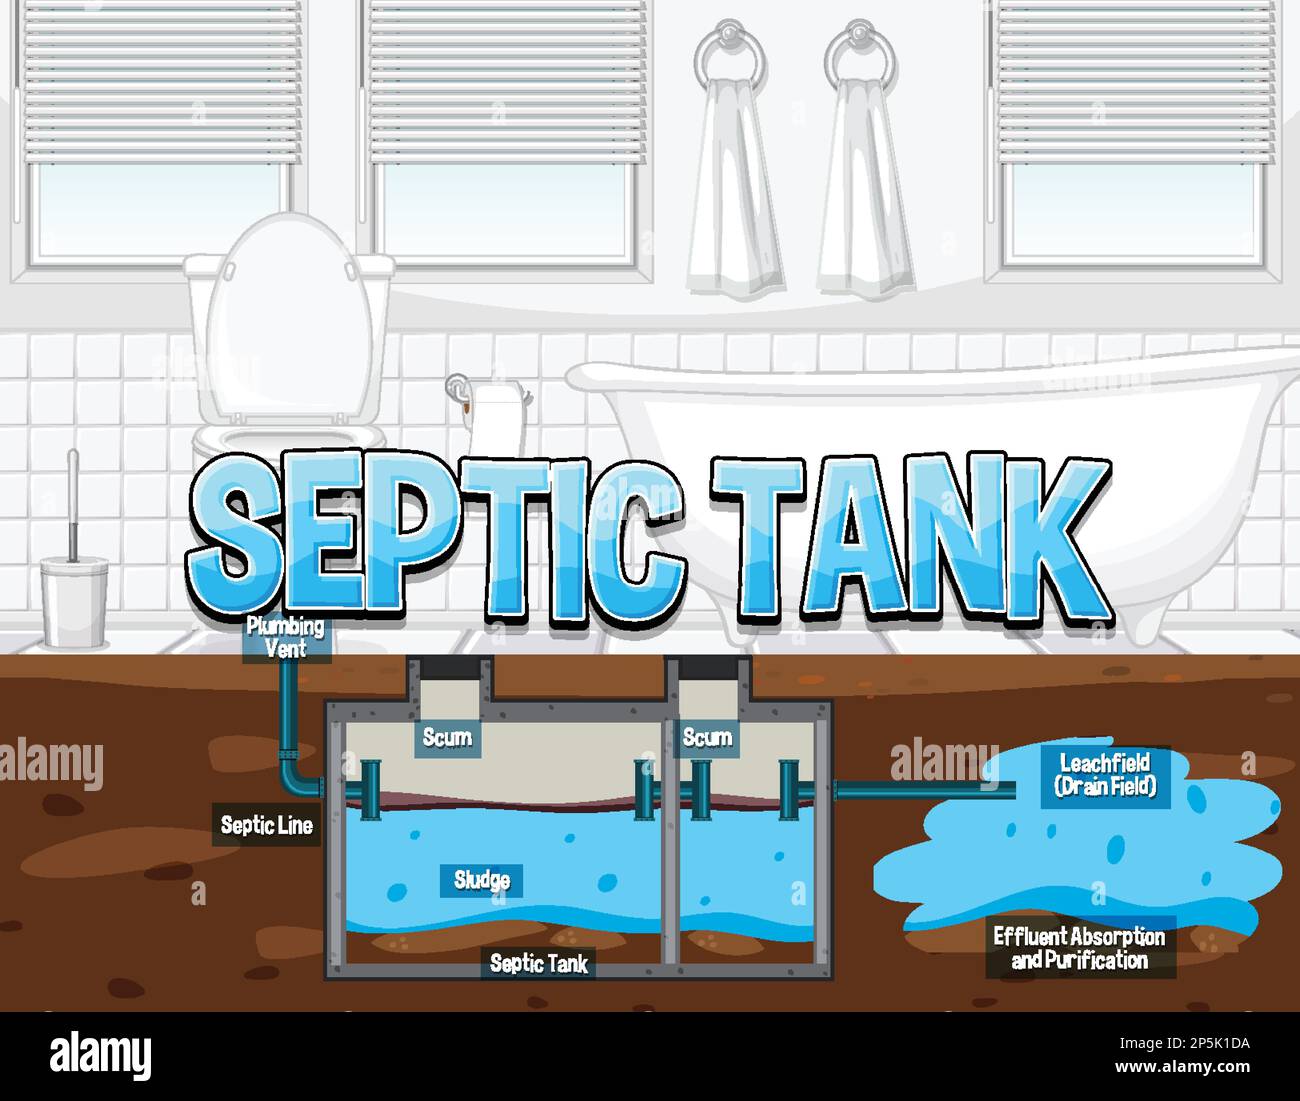 Septic Tank Dwg Get File - Colaboratory